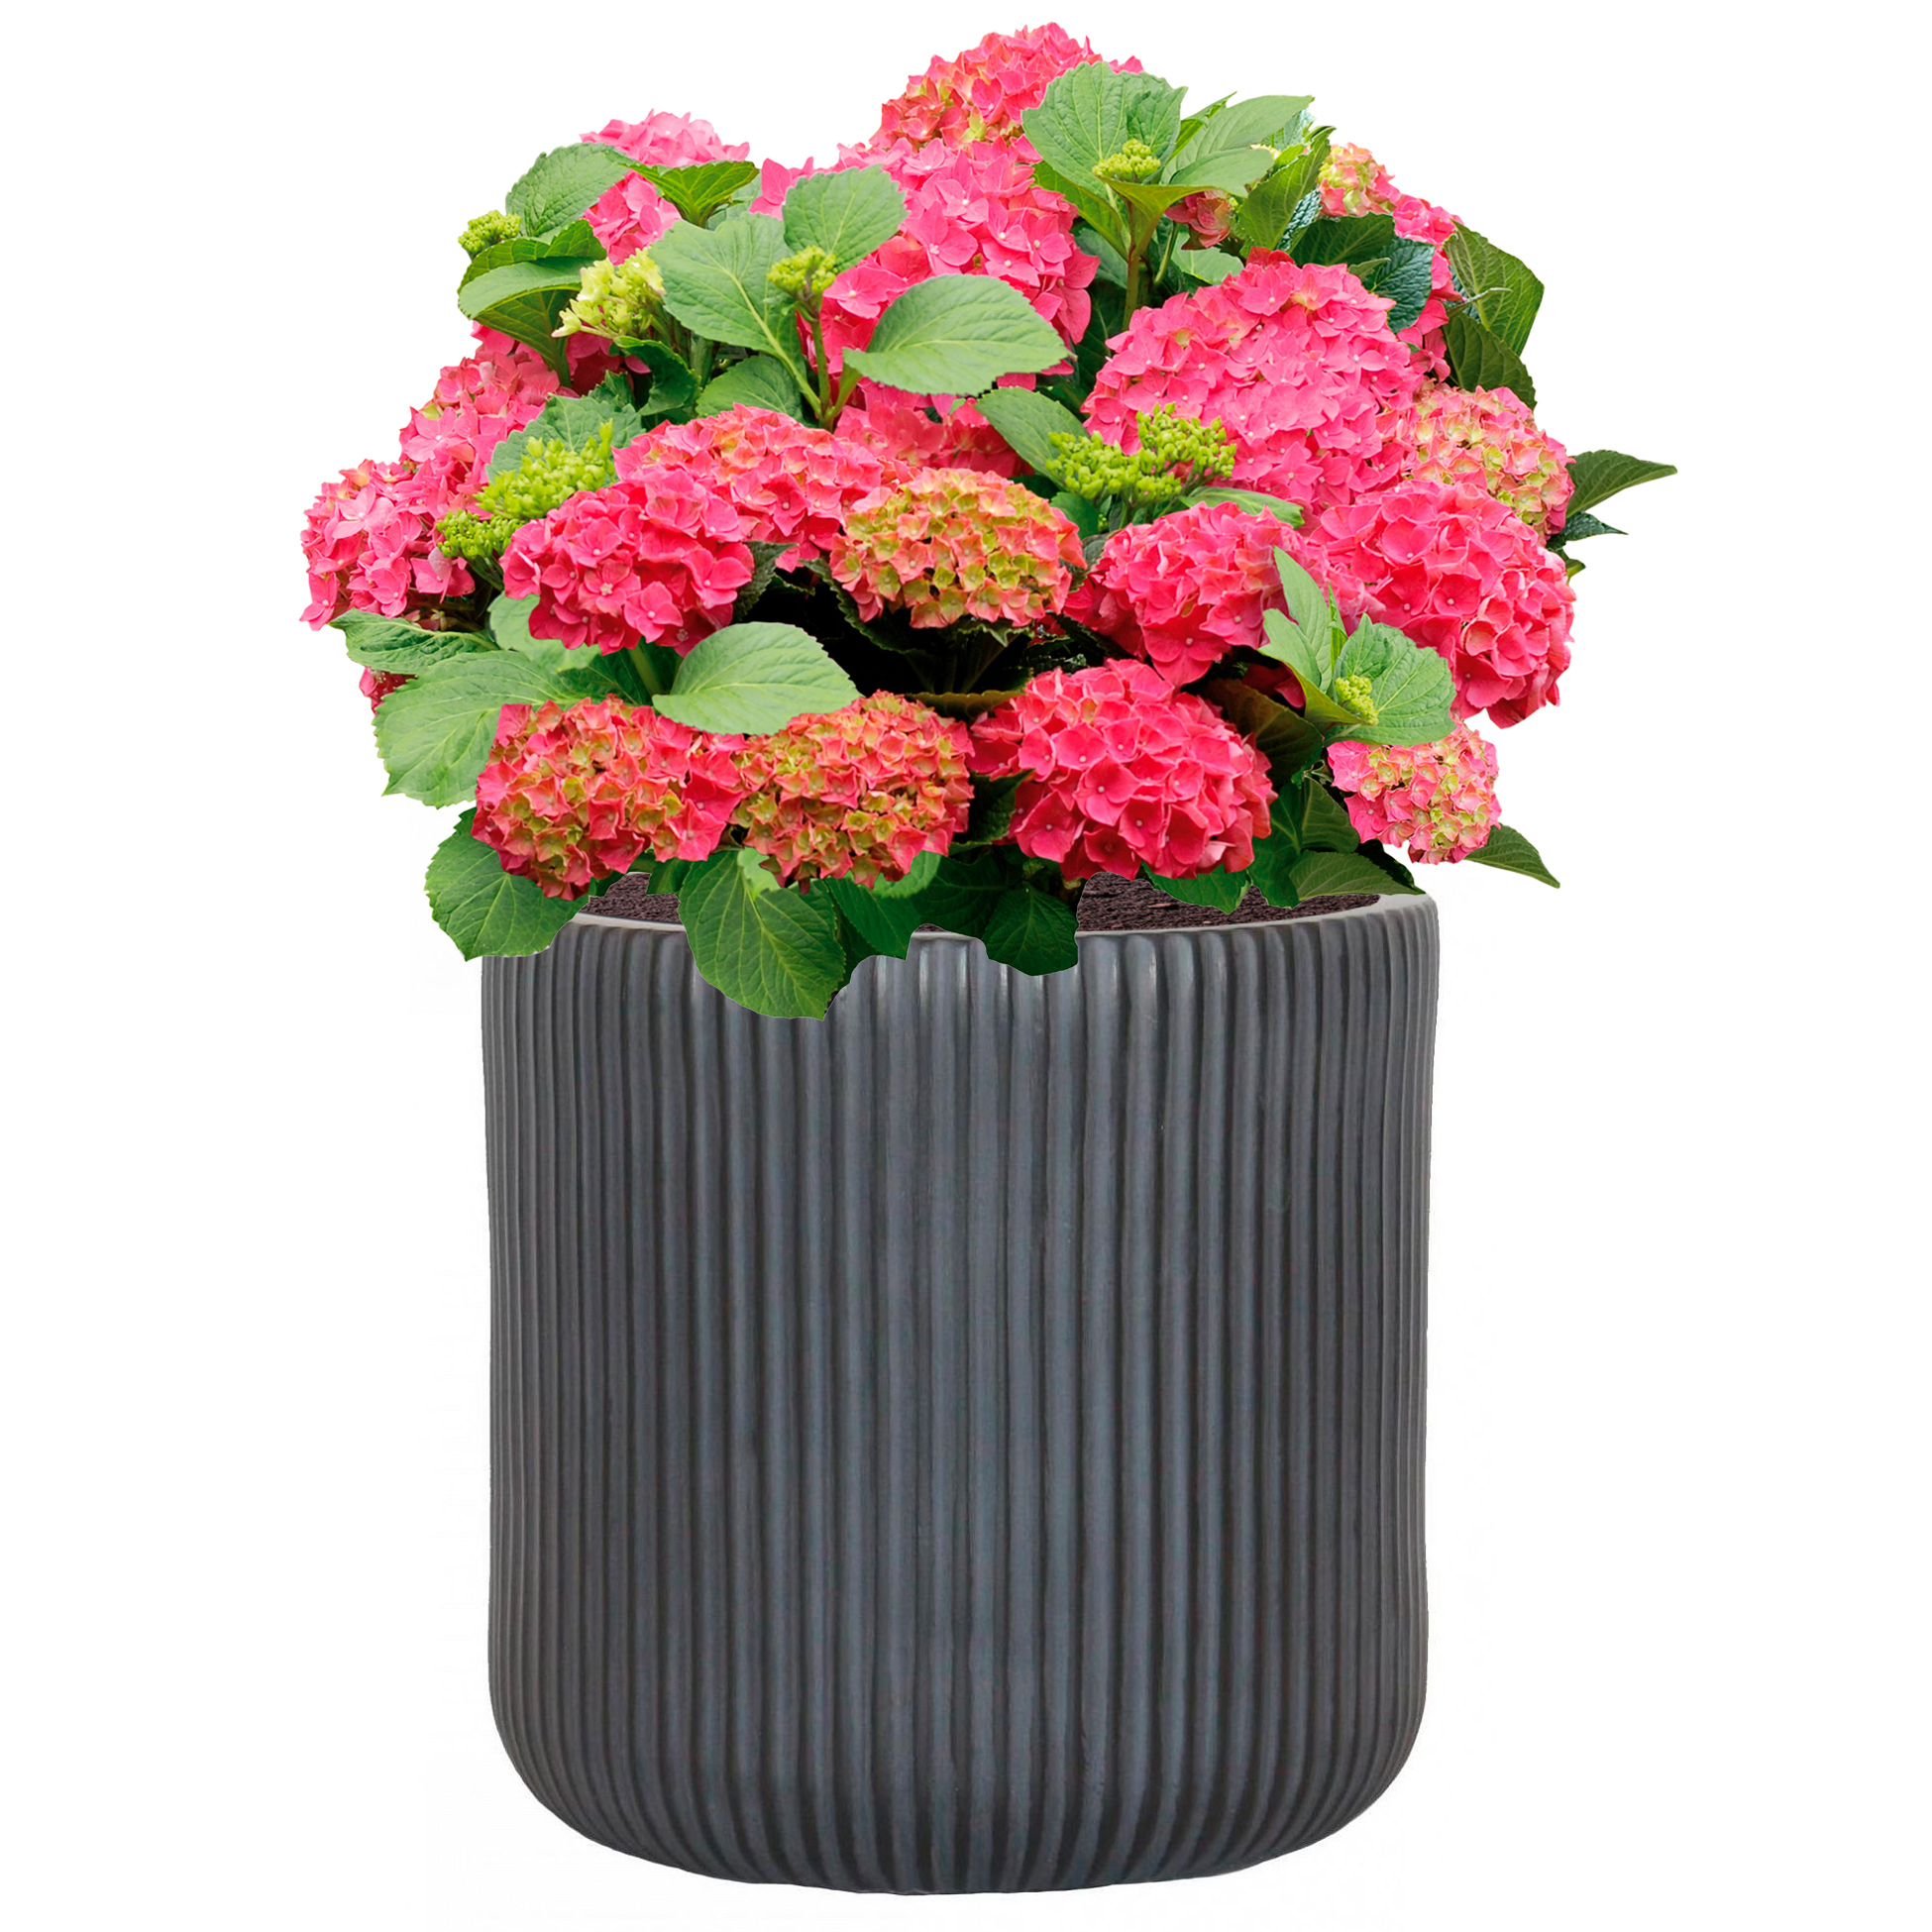 Ribbed Black Round Outdoor Planter D36.5 H37 cm, 38.7 ltrs Cap.